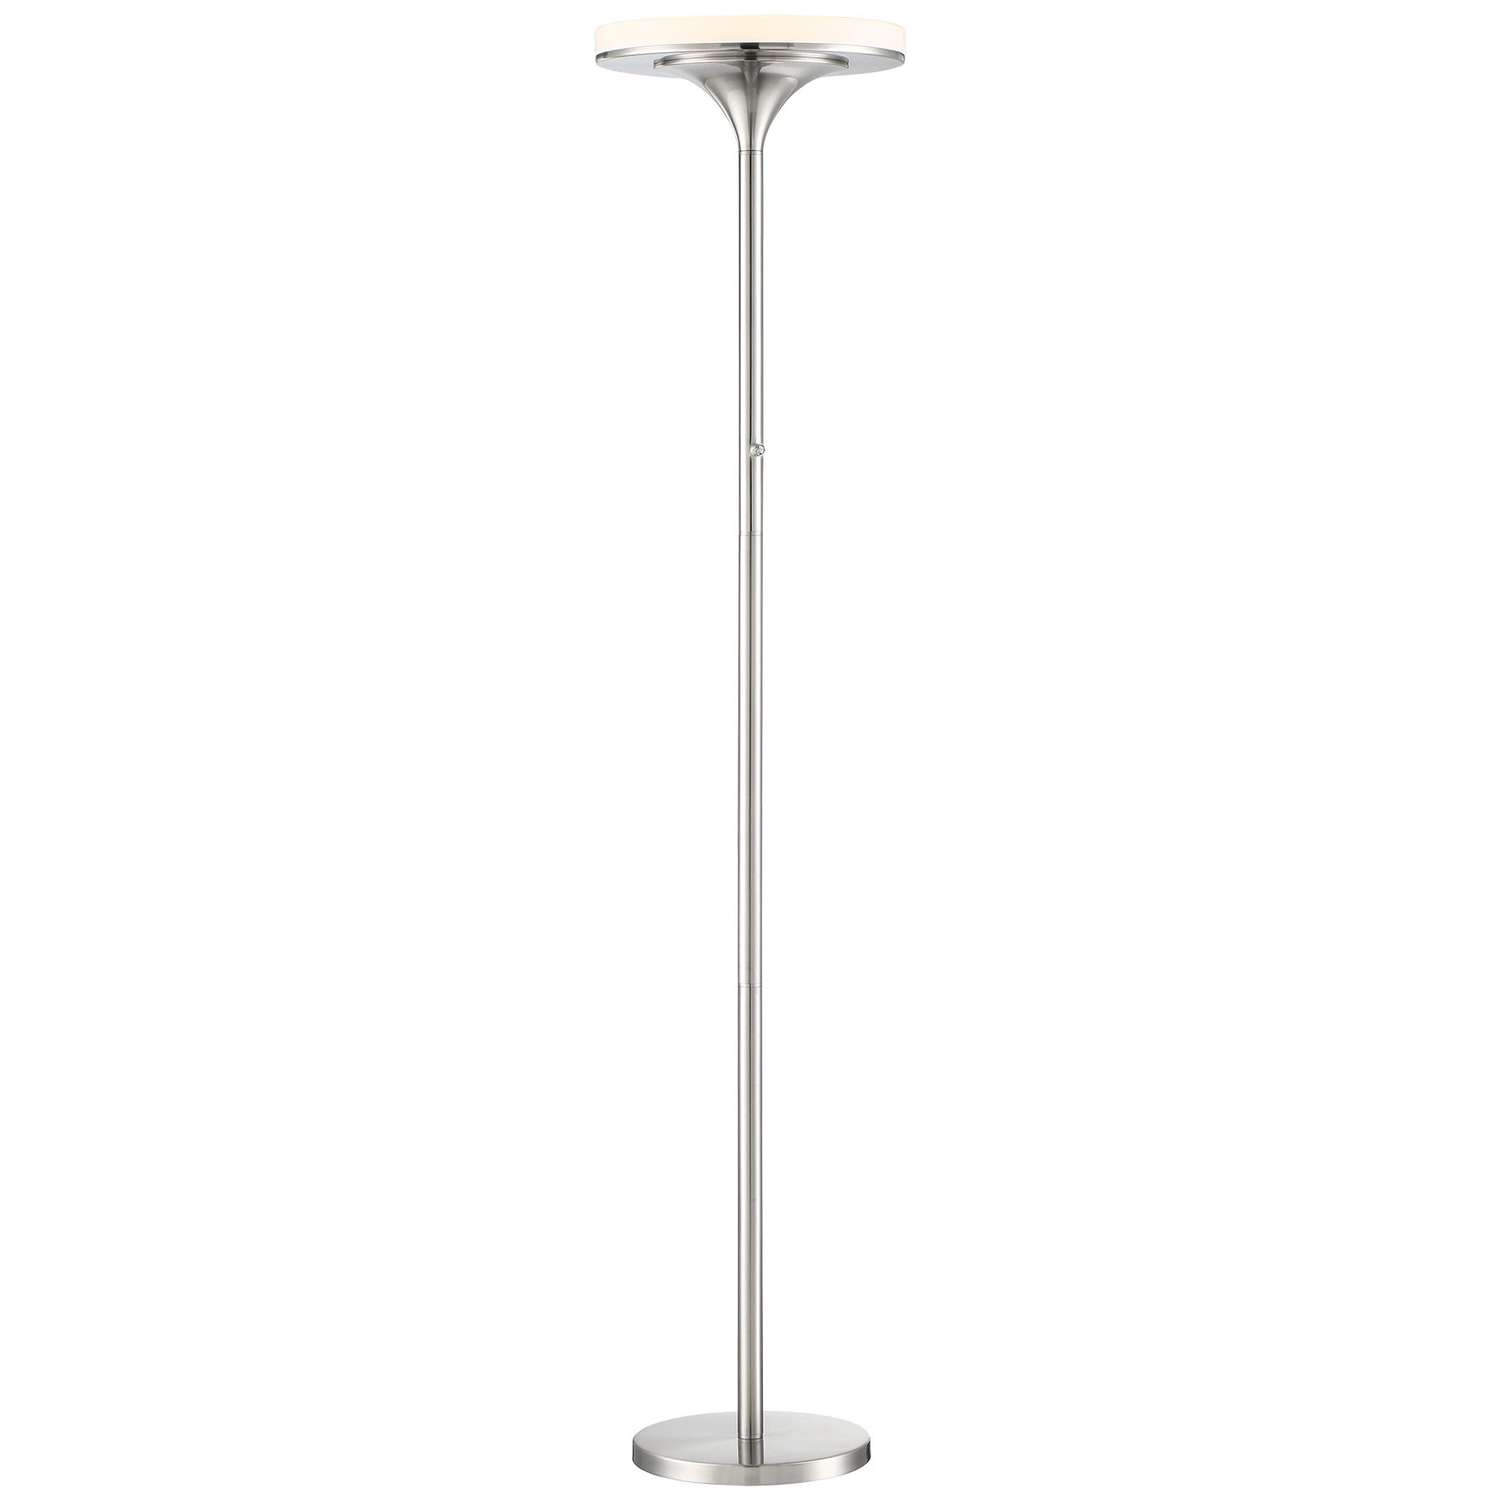 Uho Floor Lamp George Kovacs Torchiere Lamps Ylighting within measurements 1500 X 1500